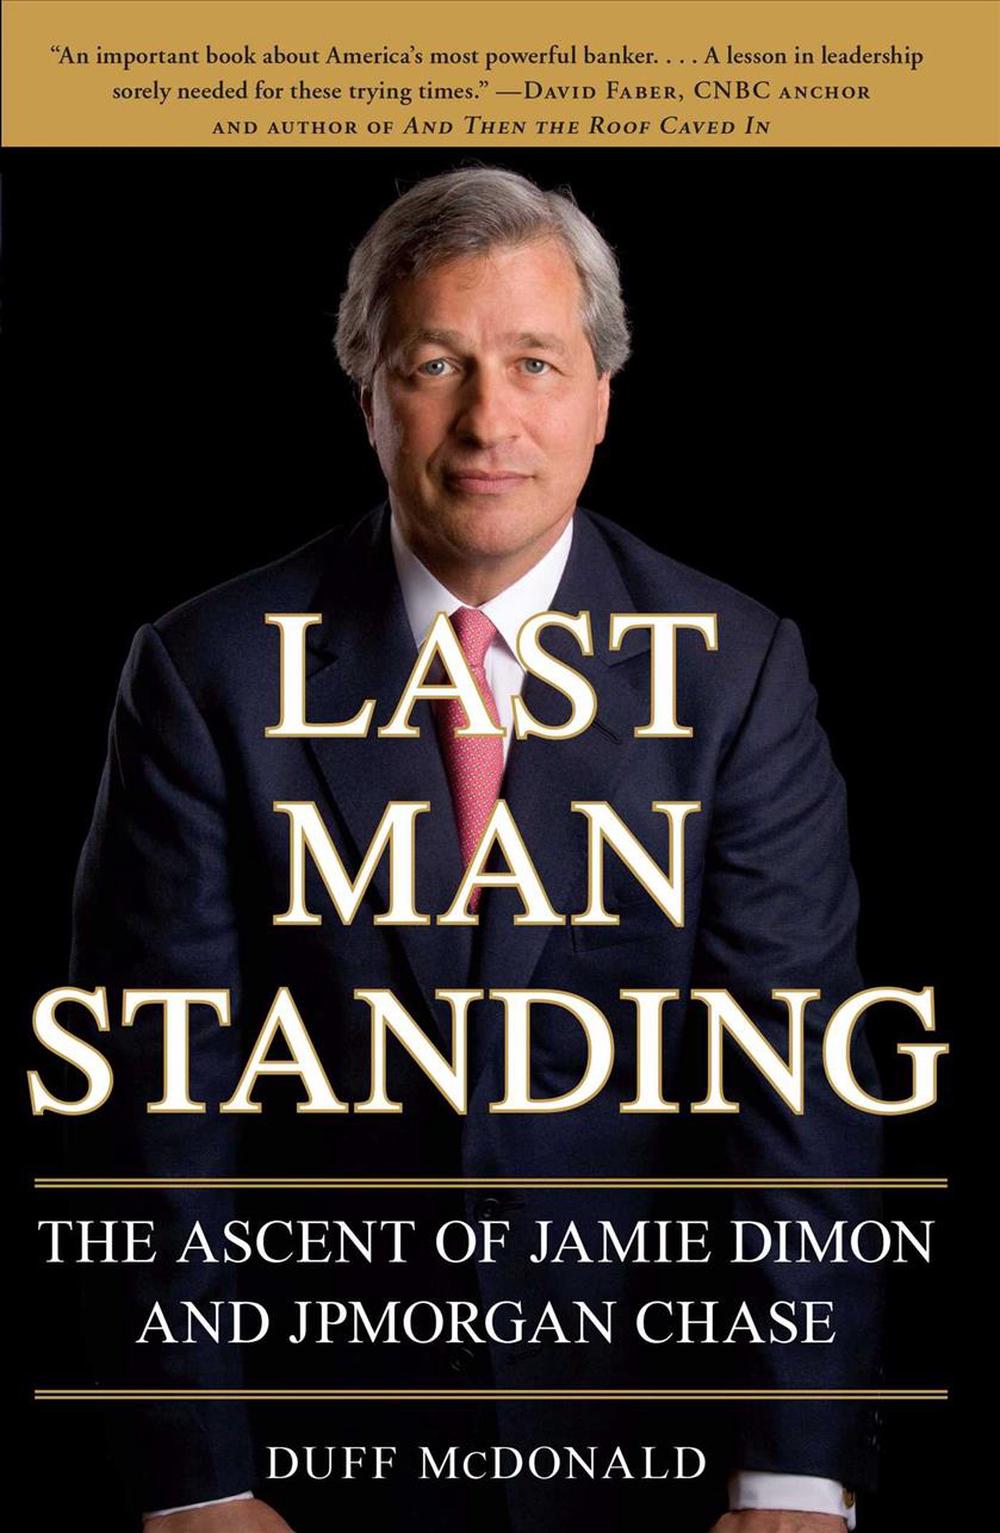 Last Man Standing The Ascent of Jamie Dimon and Chase by Duff McDonald, Paperback